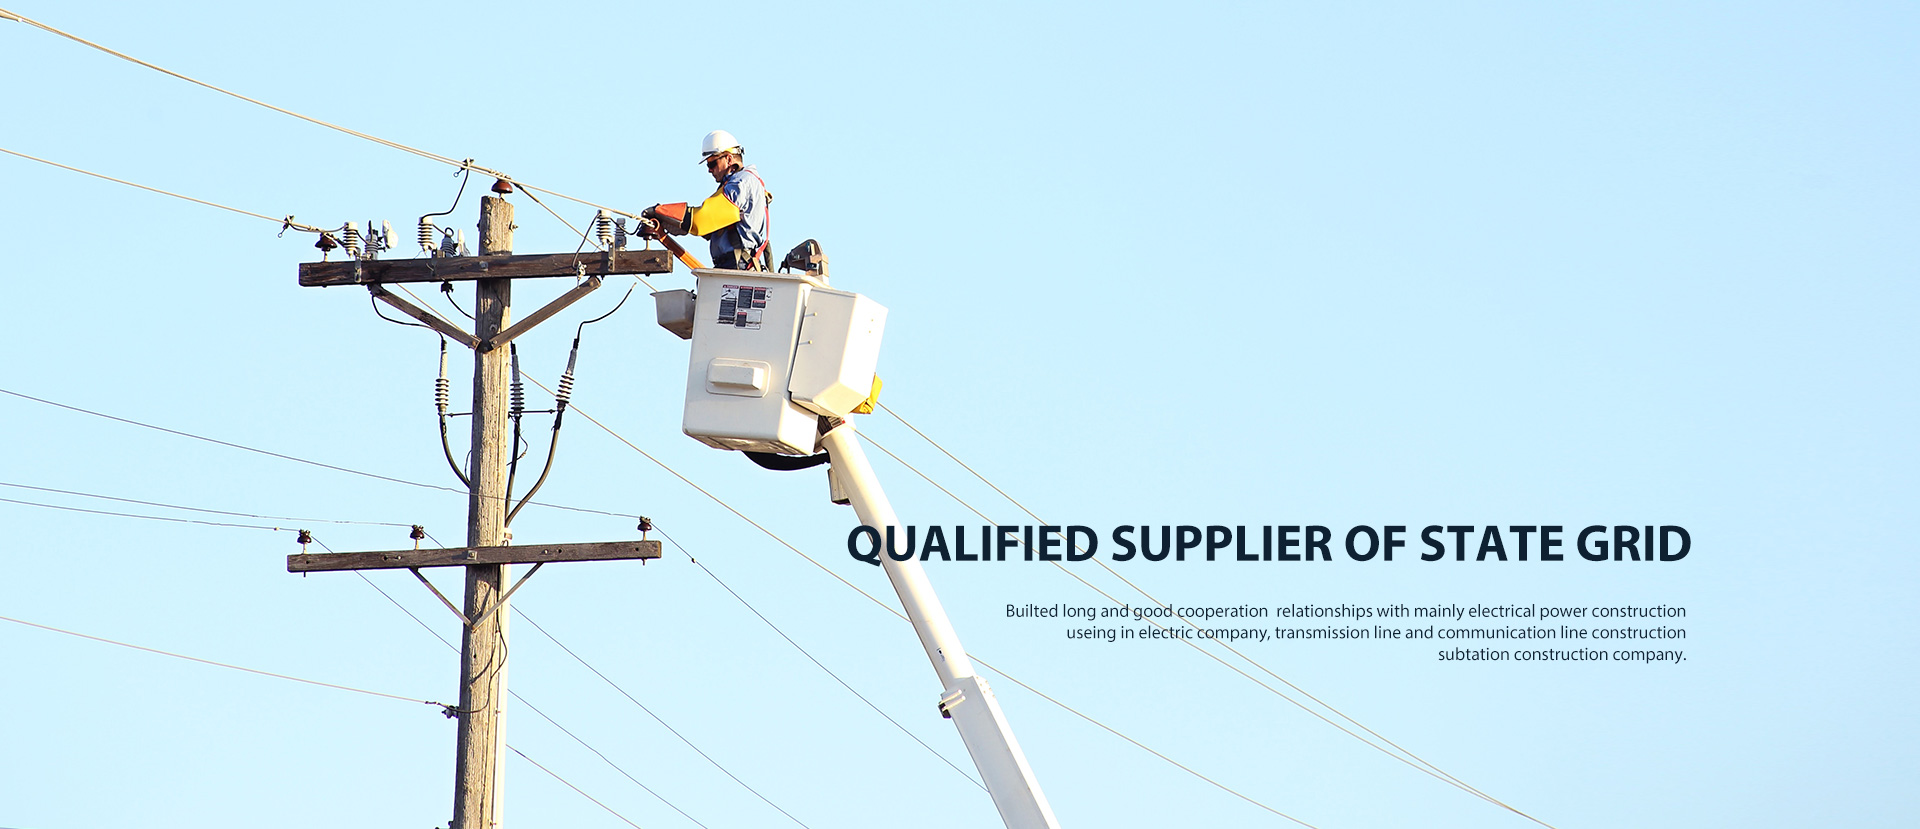 QUALIFIED SUPPLIER OF STATE GRID